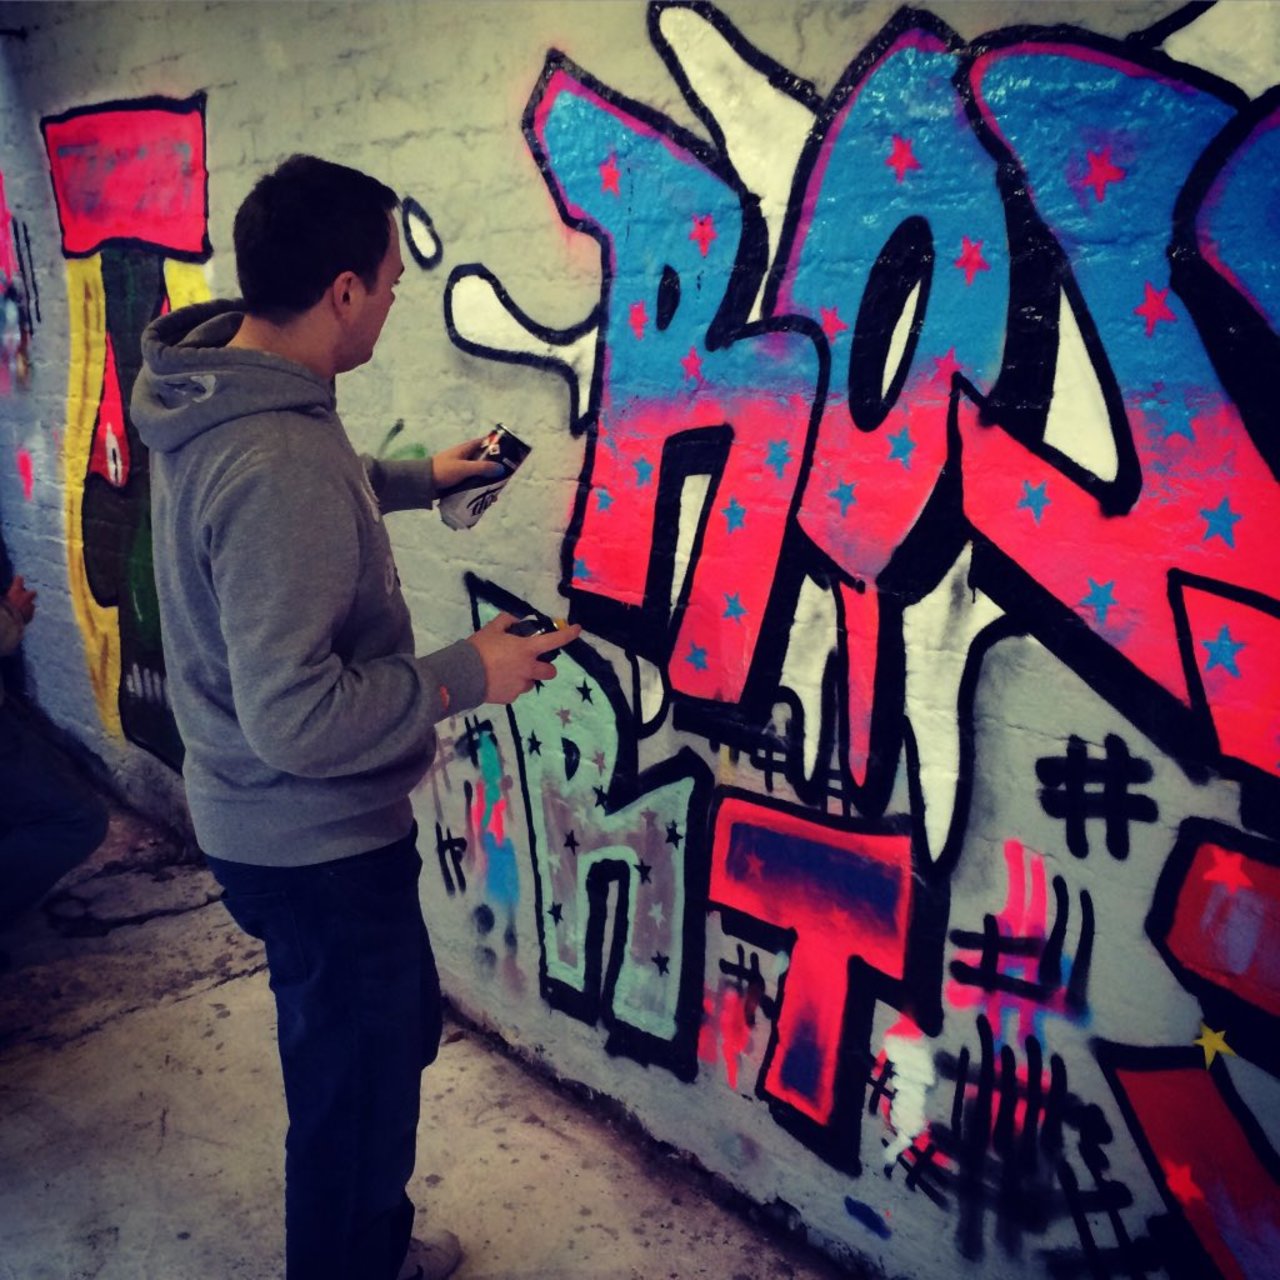 RT @Chesterart92: How's coming to next months #graffiti classes? http://www.thecontemporarychester.com/product-category/graffiti-classes/ #art#contemporary #popadt #streetart https://t.co/ZpkDbjos7c